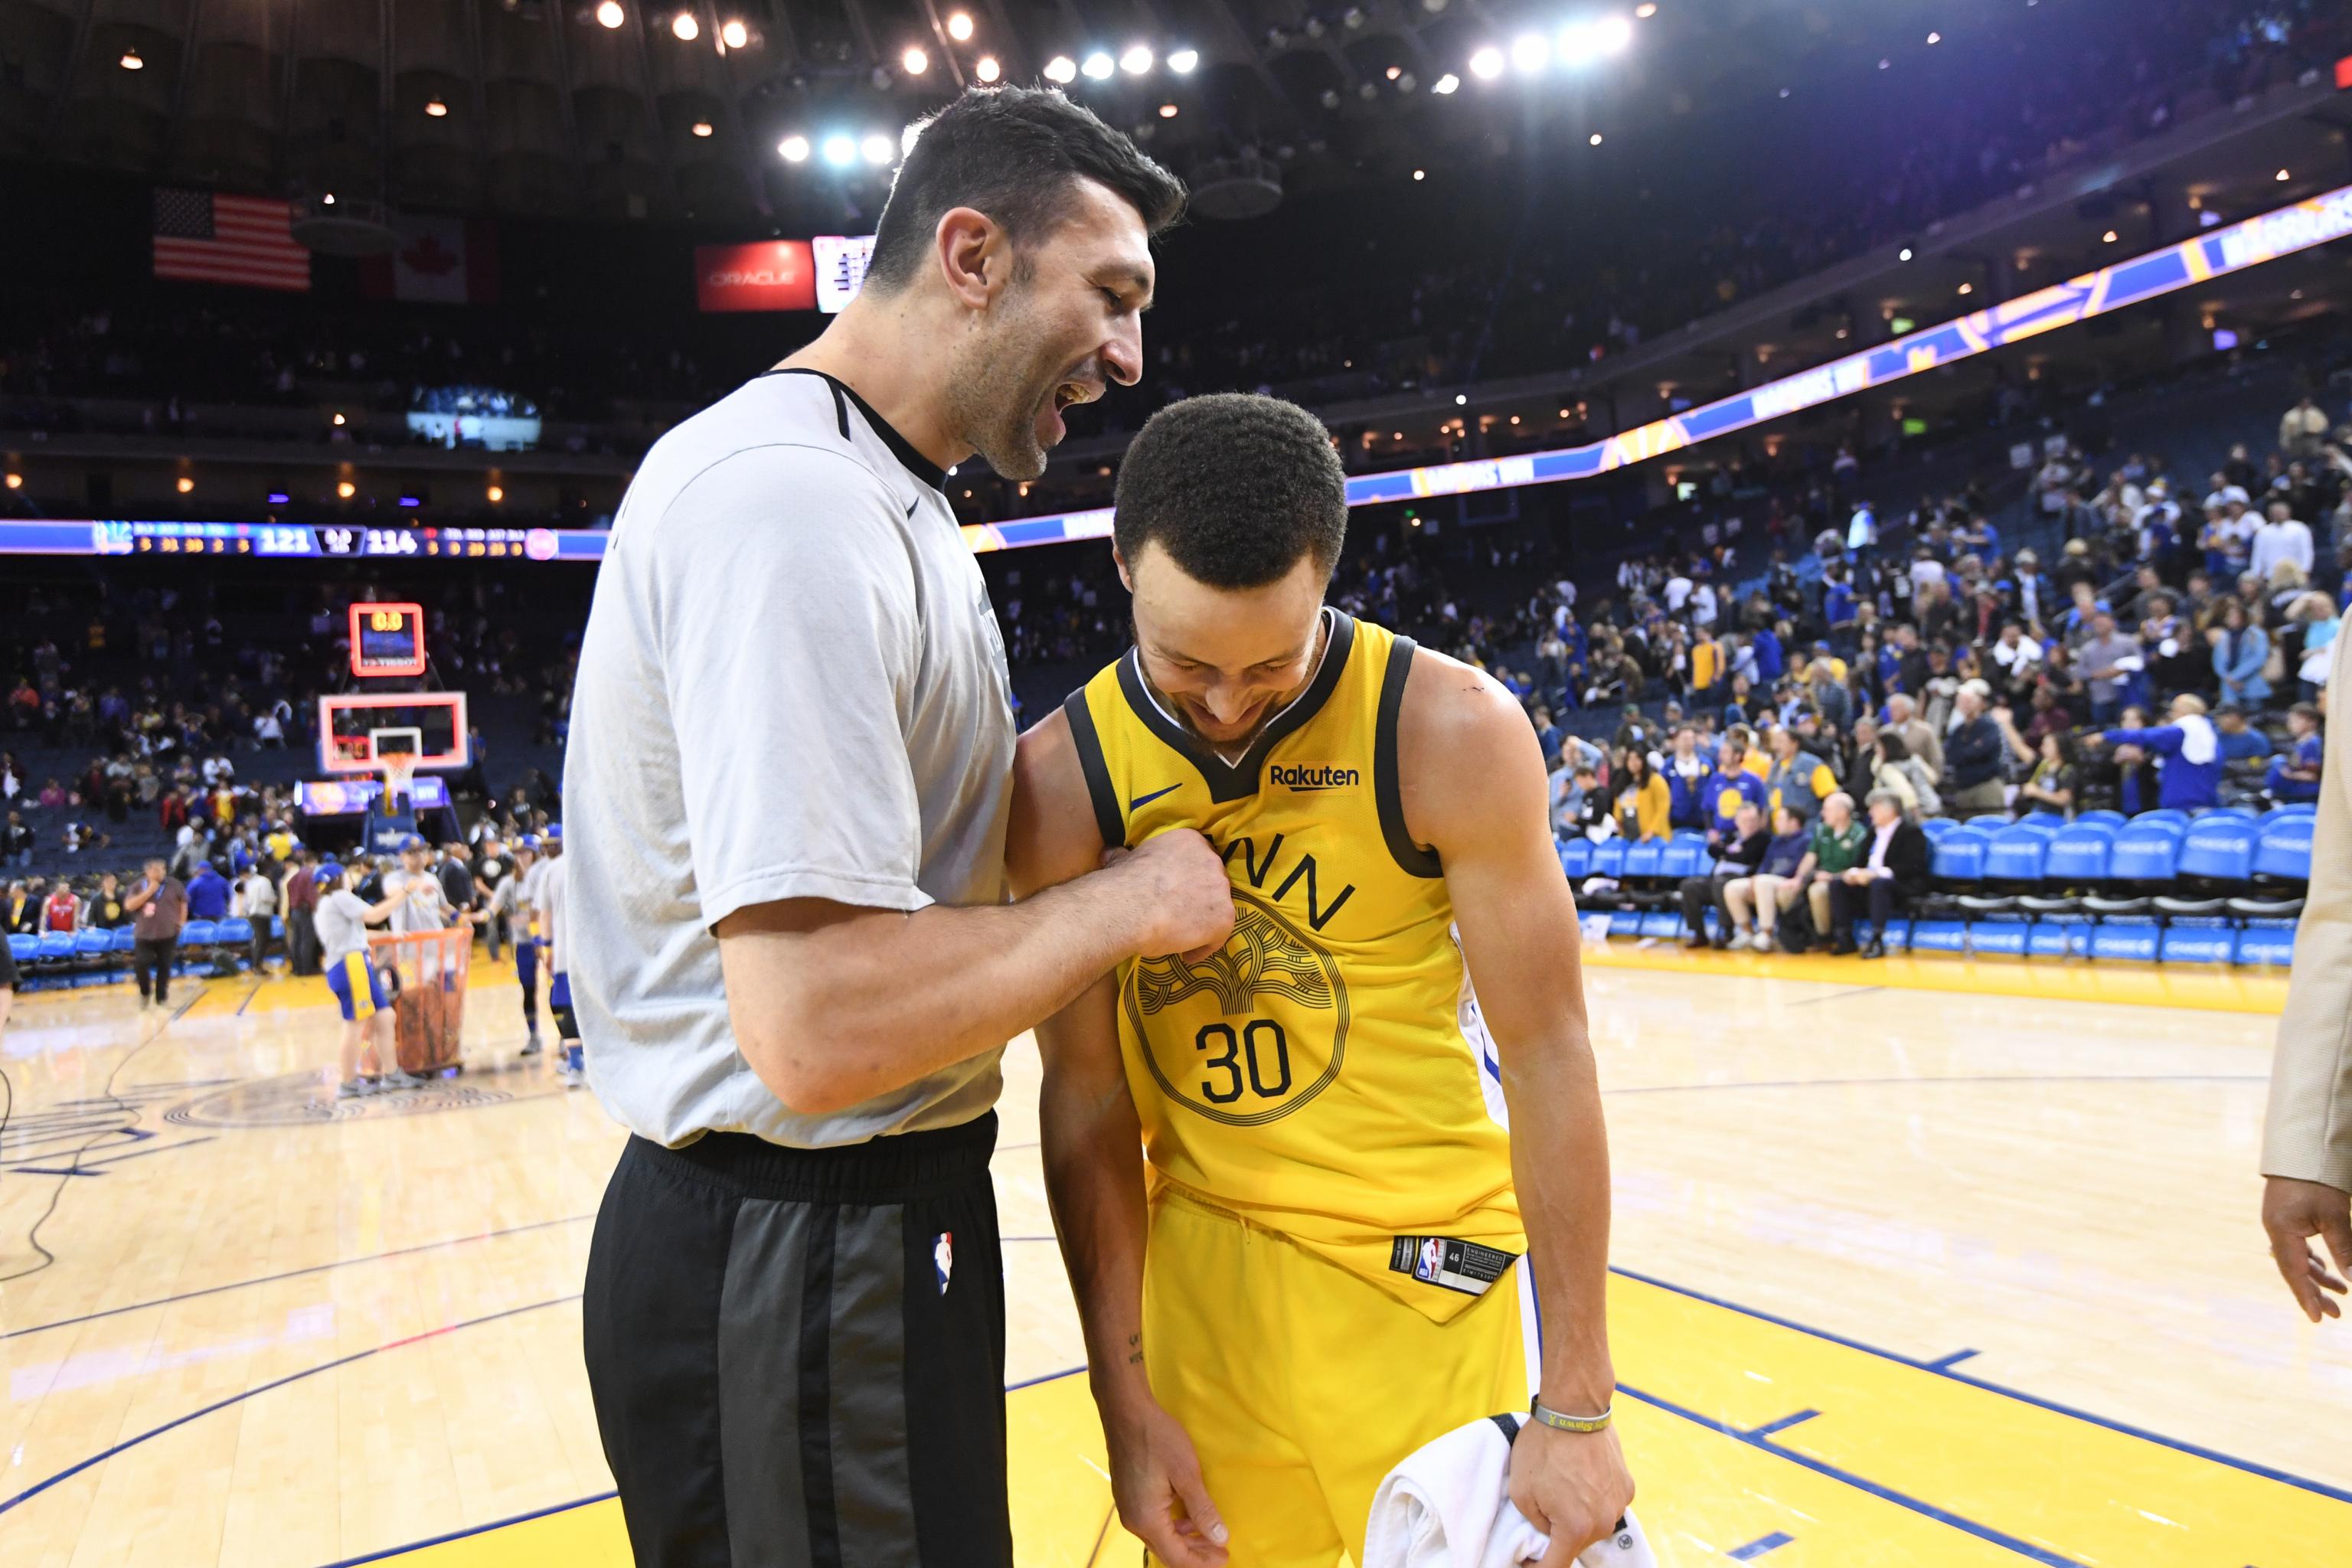 Warriors' center Zaza Pachulia cleared to play in Game 1 of NBA